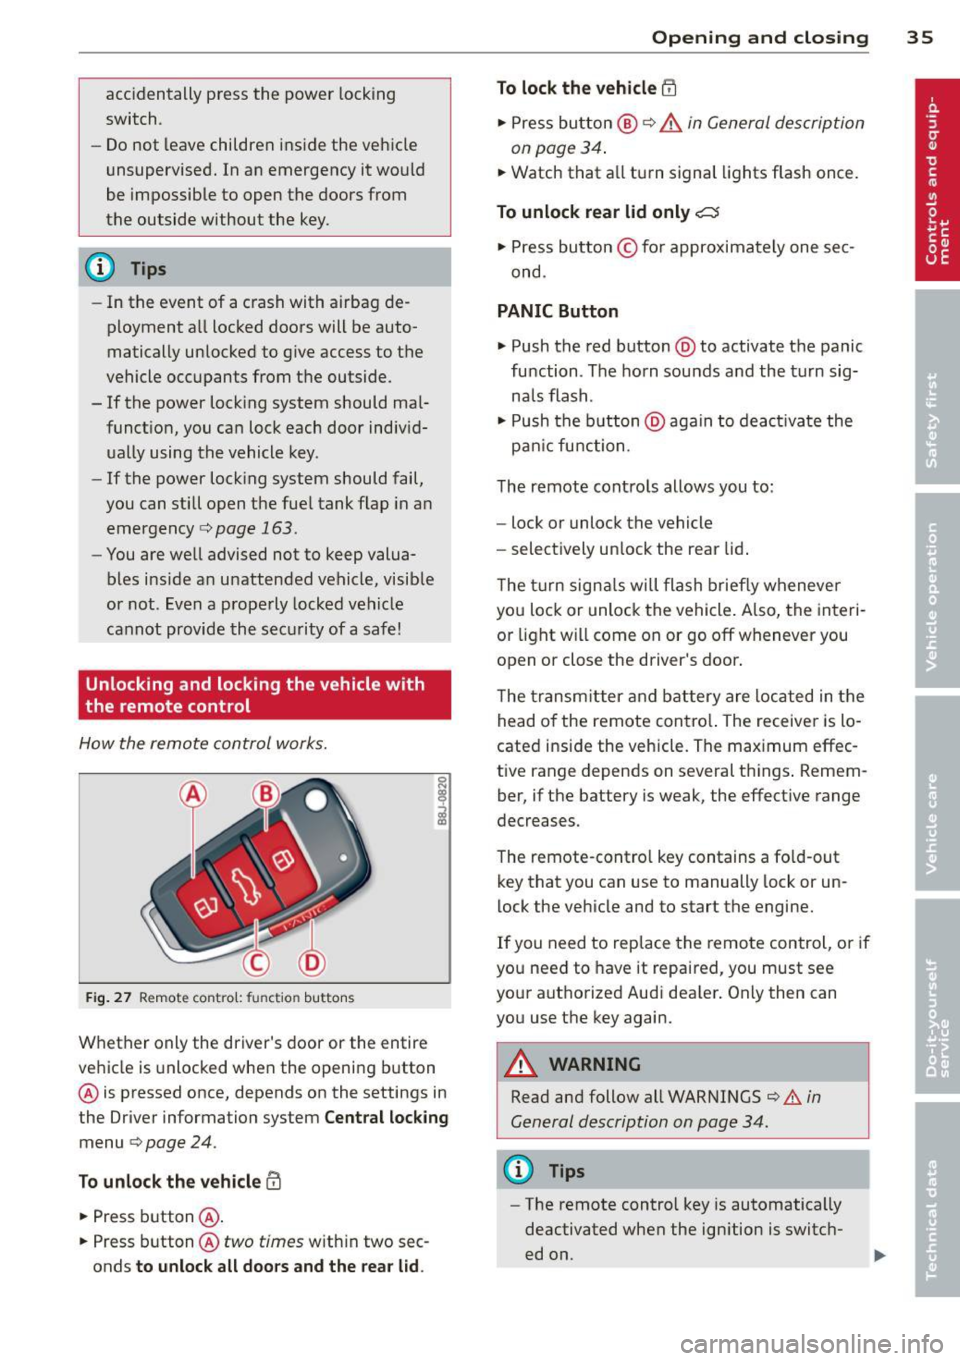 AUDI TT ROADSTER 2015 User Guide accidentally  press  the  power locking 
switch. 
- Do not  leave  children  inside  the  vehicle 
unsupervised.  In  an  emergency  it  would 
be  impossible  to  open  the  doors  from 
the  outside